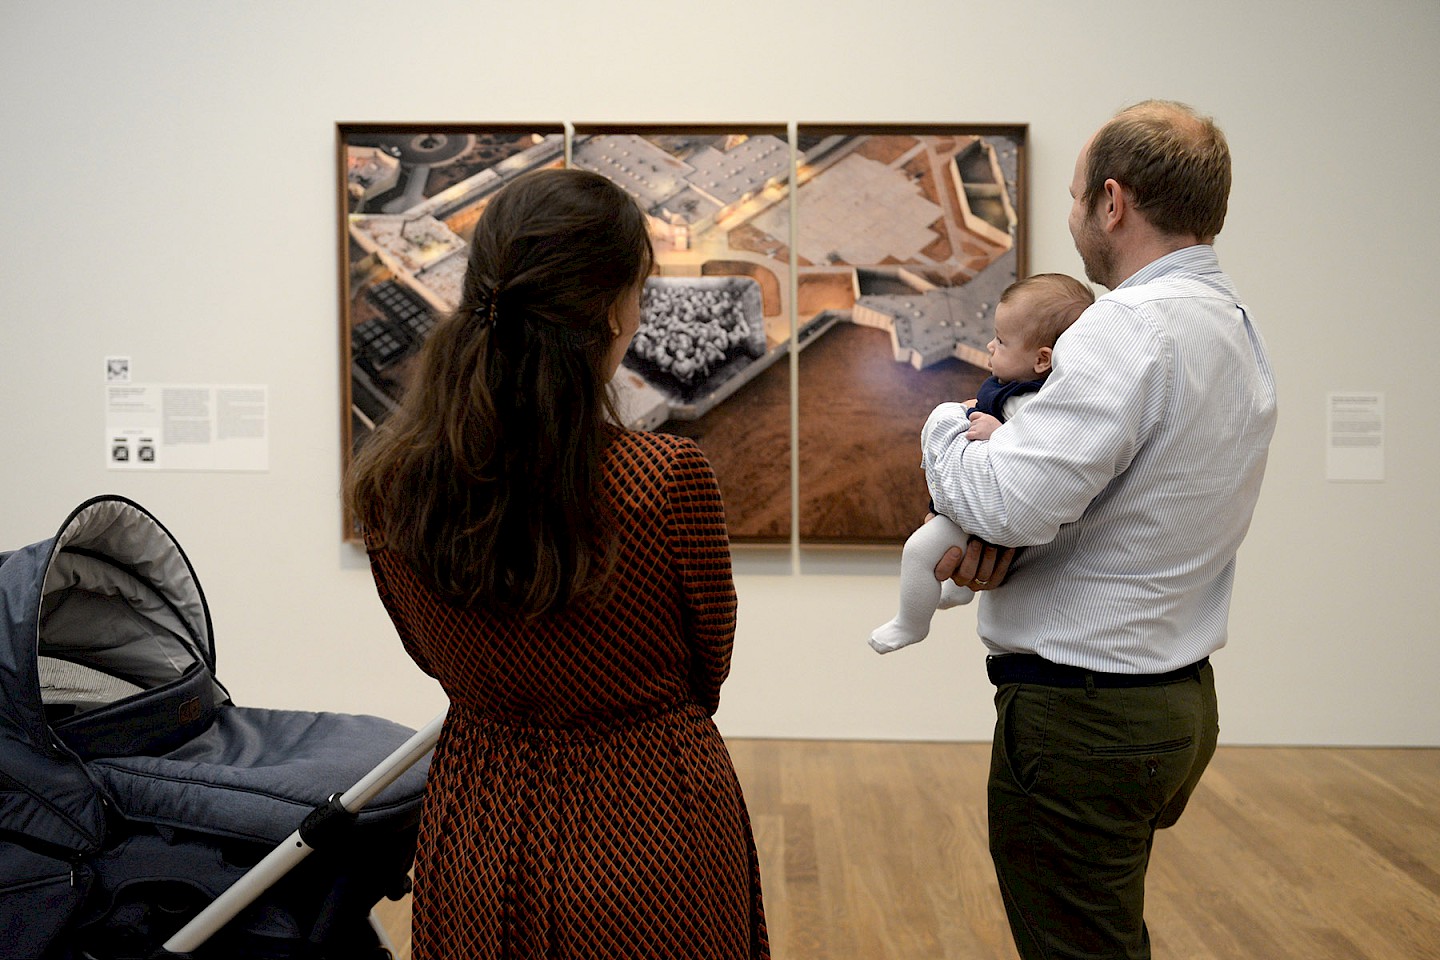 Parents with baby at the museum.